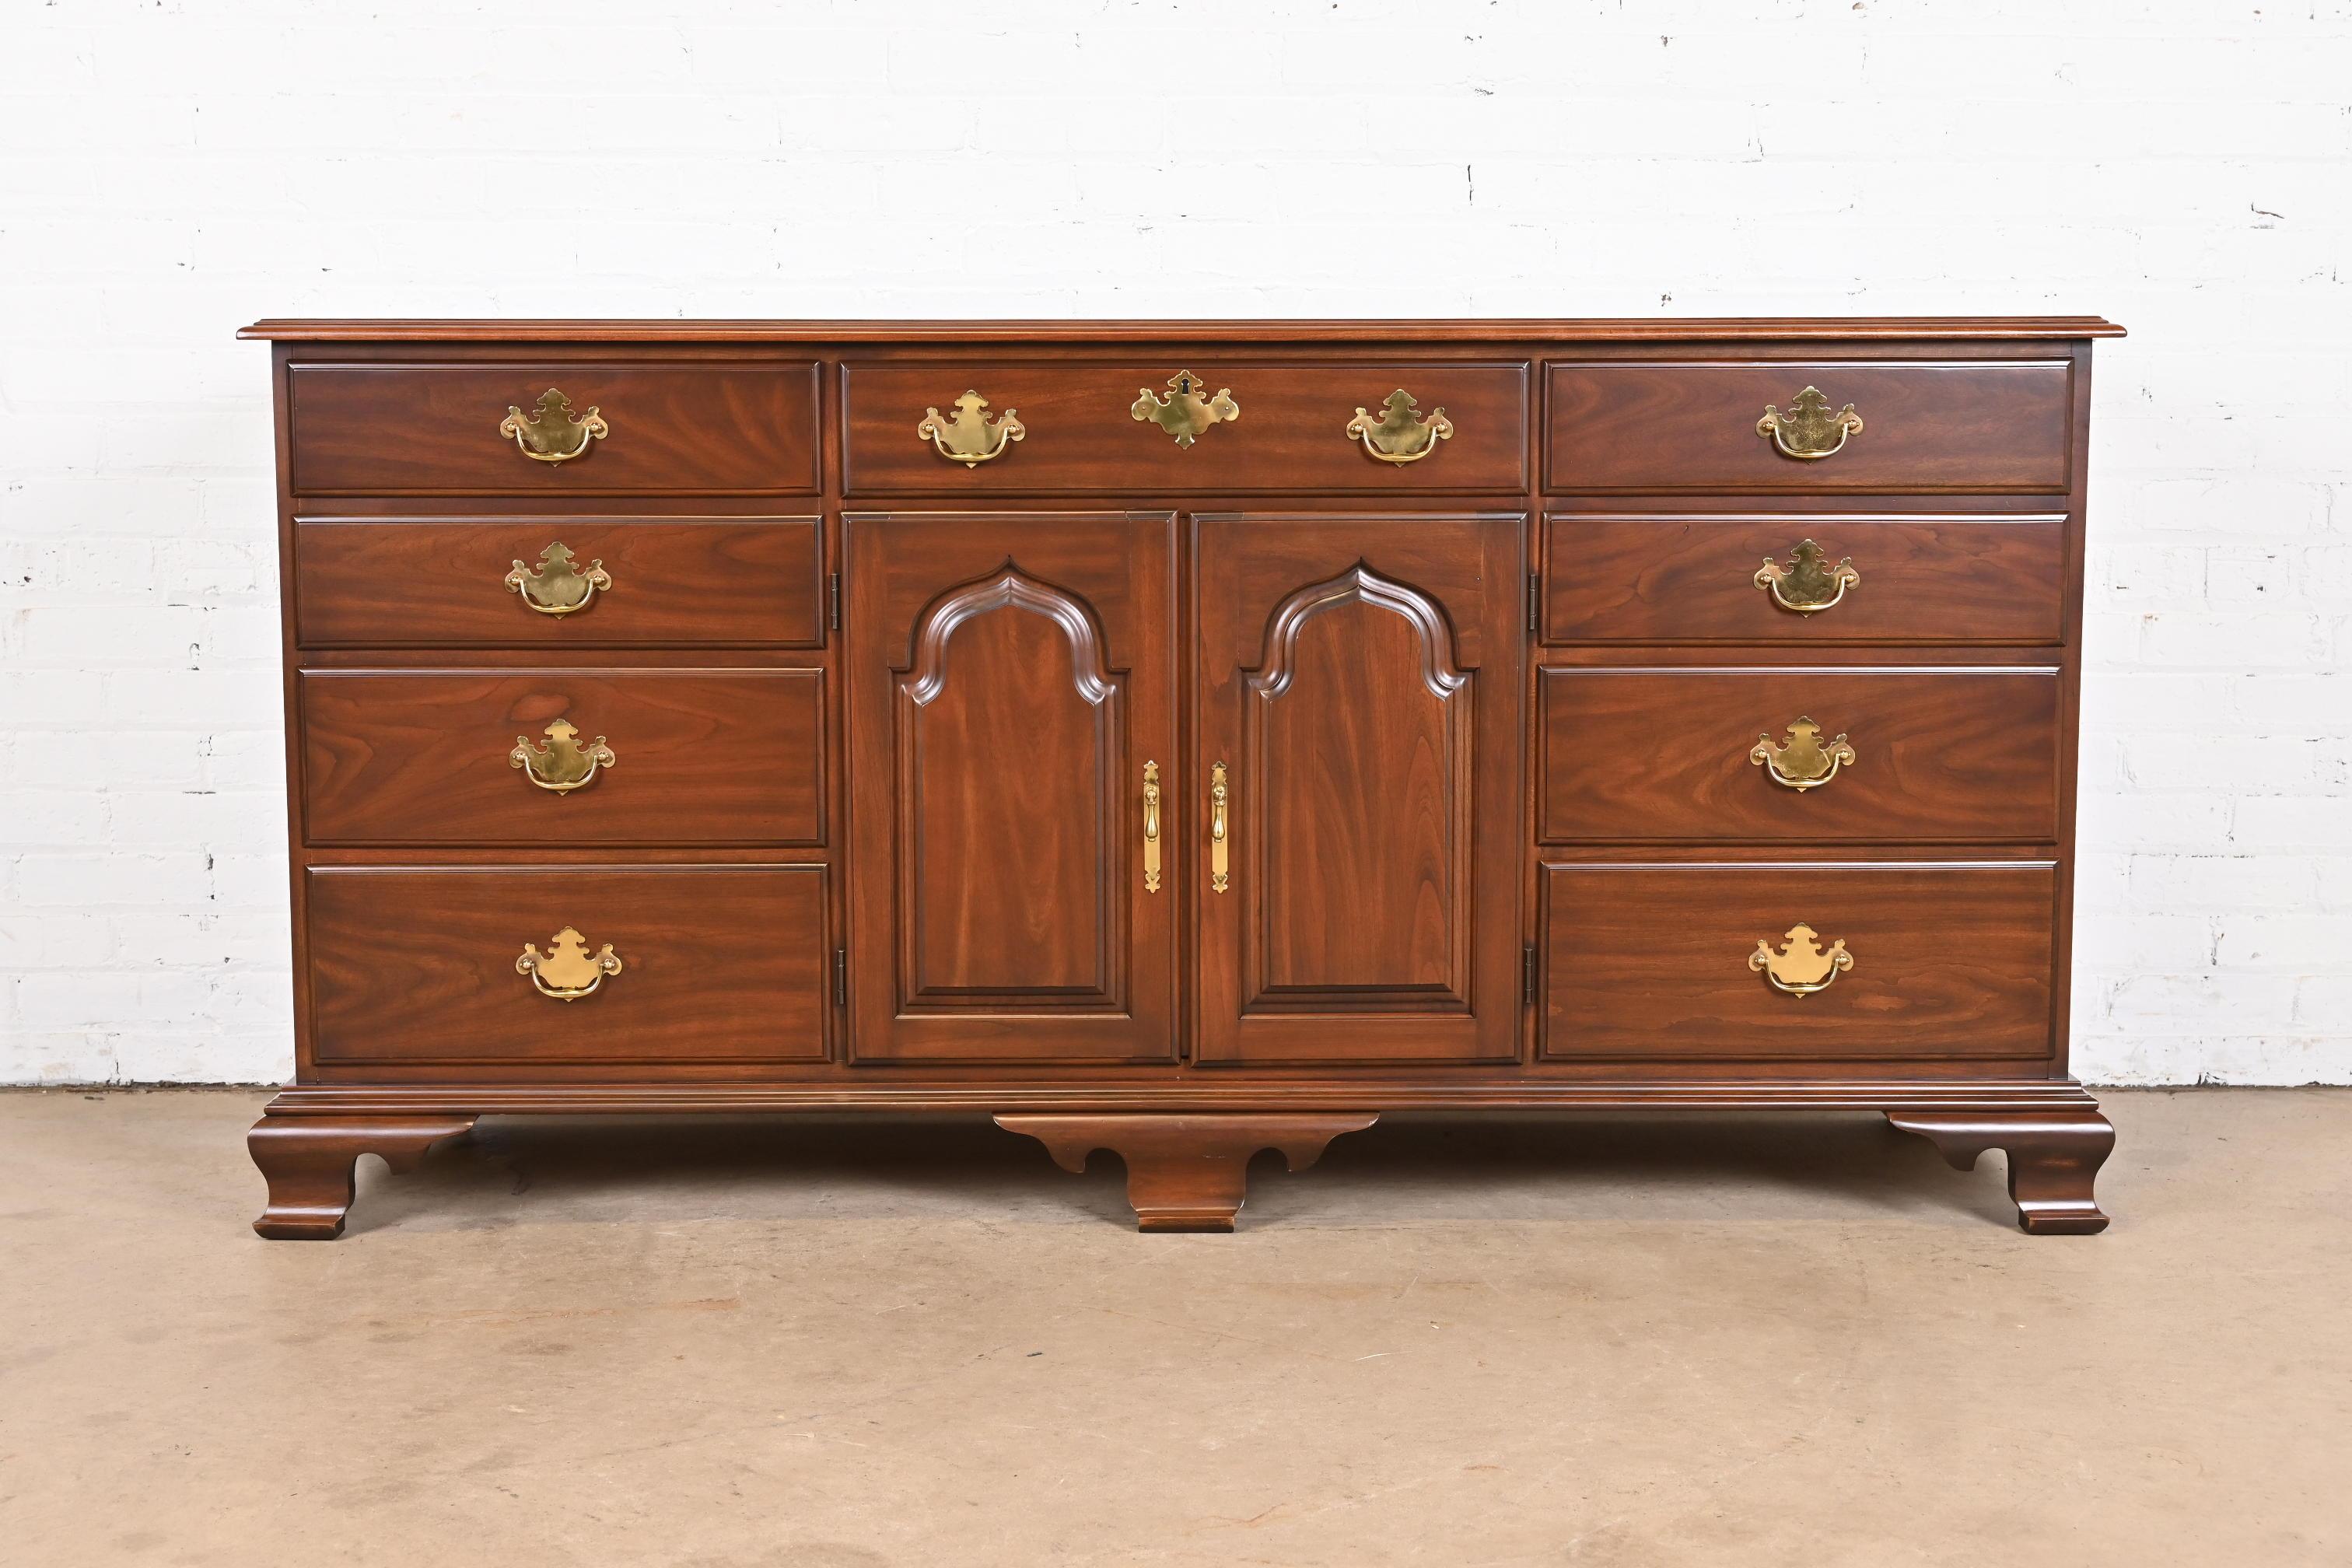 Harden Furniture Georgian Solid Cherry Wood Long Dresser, Newly Restored In Good Condition For Sale In South Bend, IN